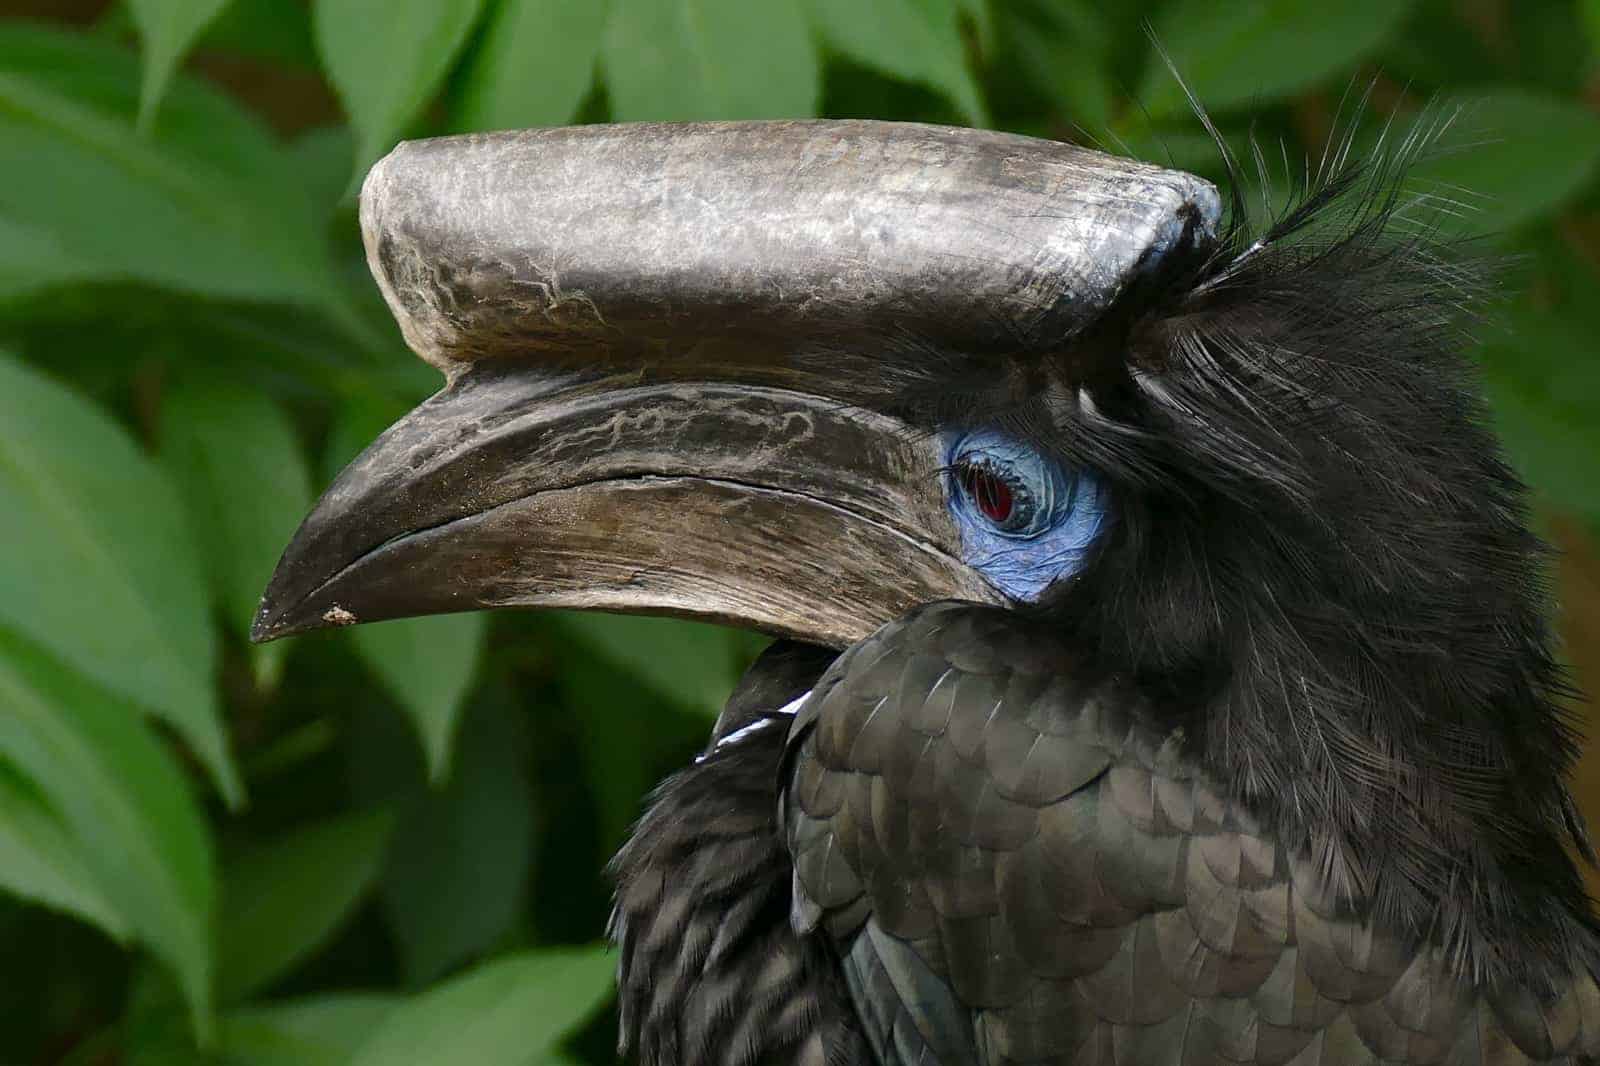 Bushmeat hunting threatens hornbills and raptors in Cameroon’s forests, study finds